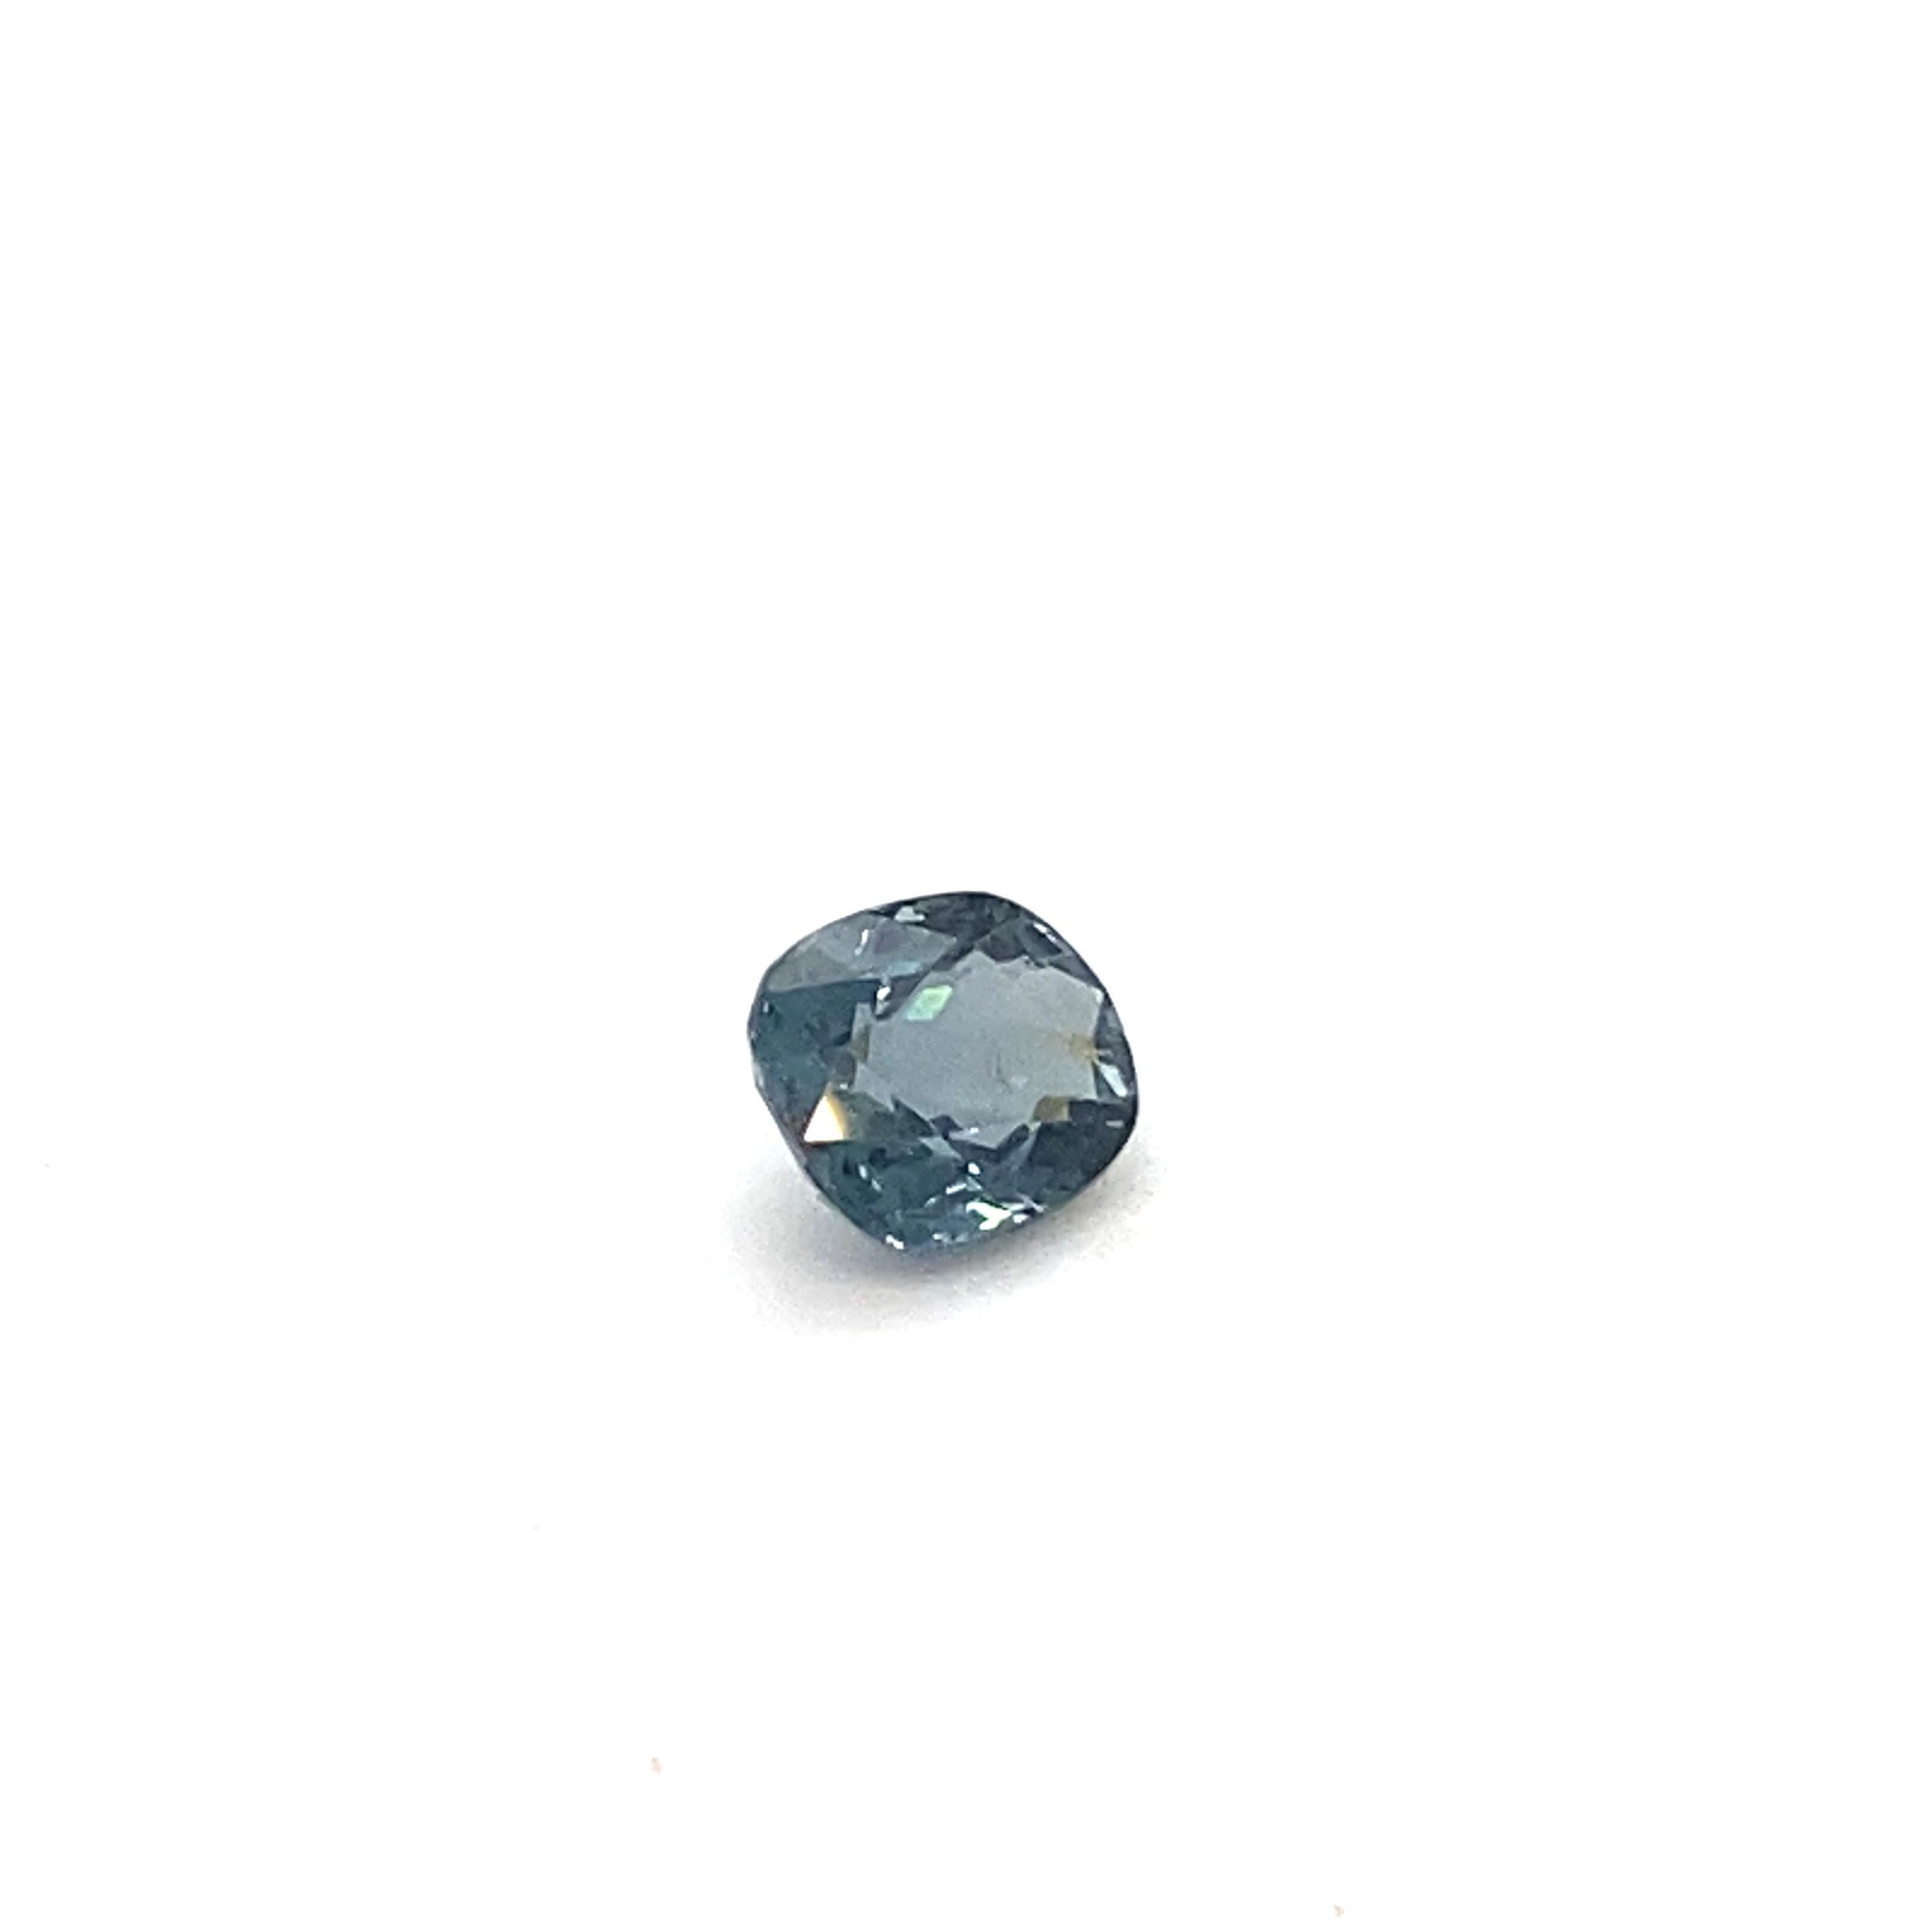 This 1.9 carat oval shape natural indigo spinel loose gemstone is carefully hand cut and hand polished by skilled artisans. This lustrous loose gemstone can be created into any stunning piece of jewelry according to your choice.
Spinel is the birth